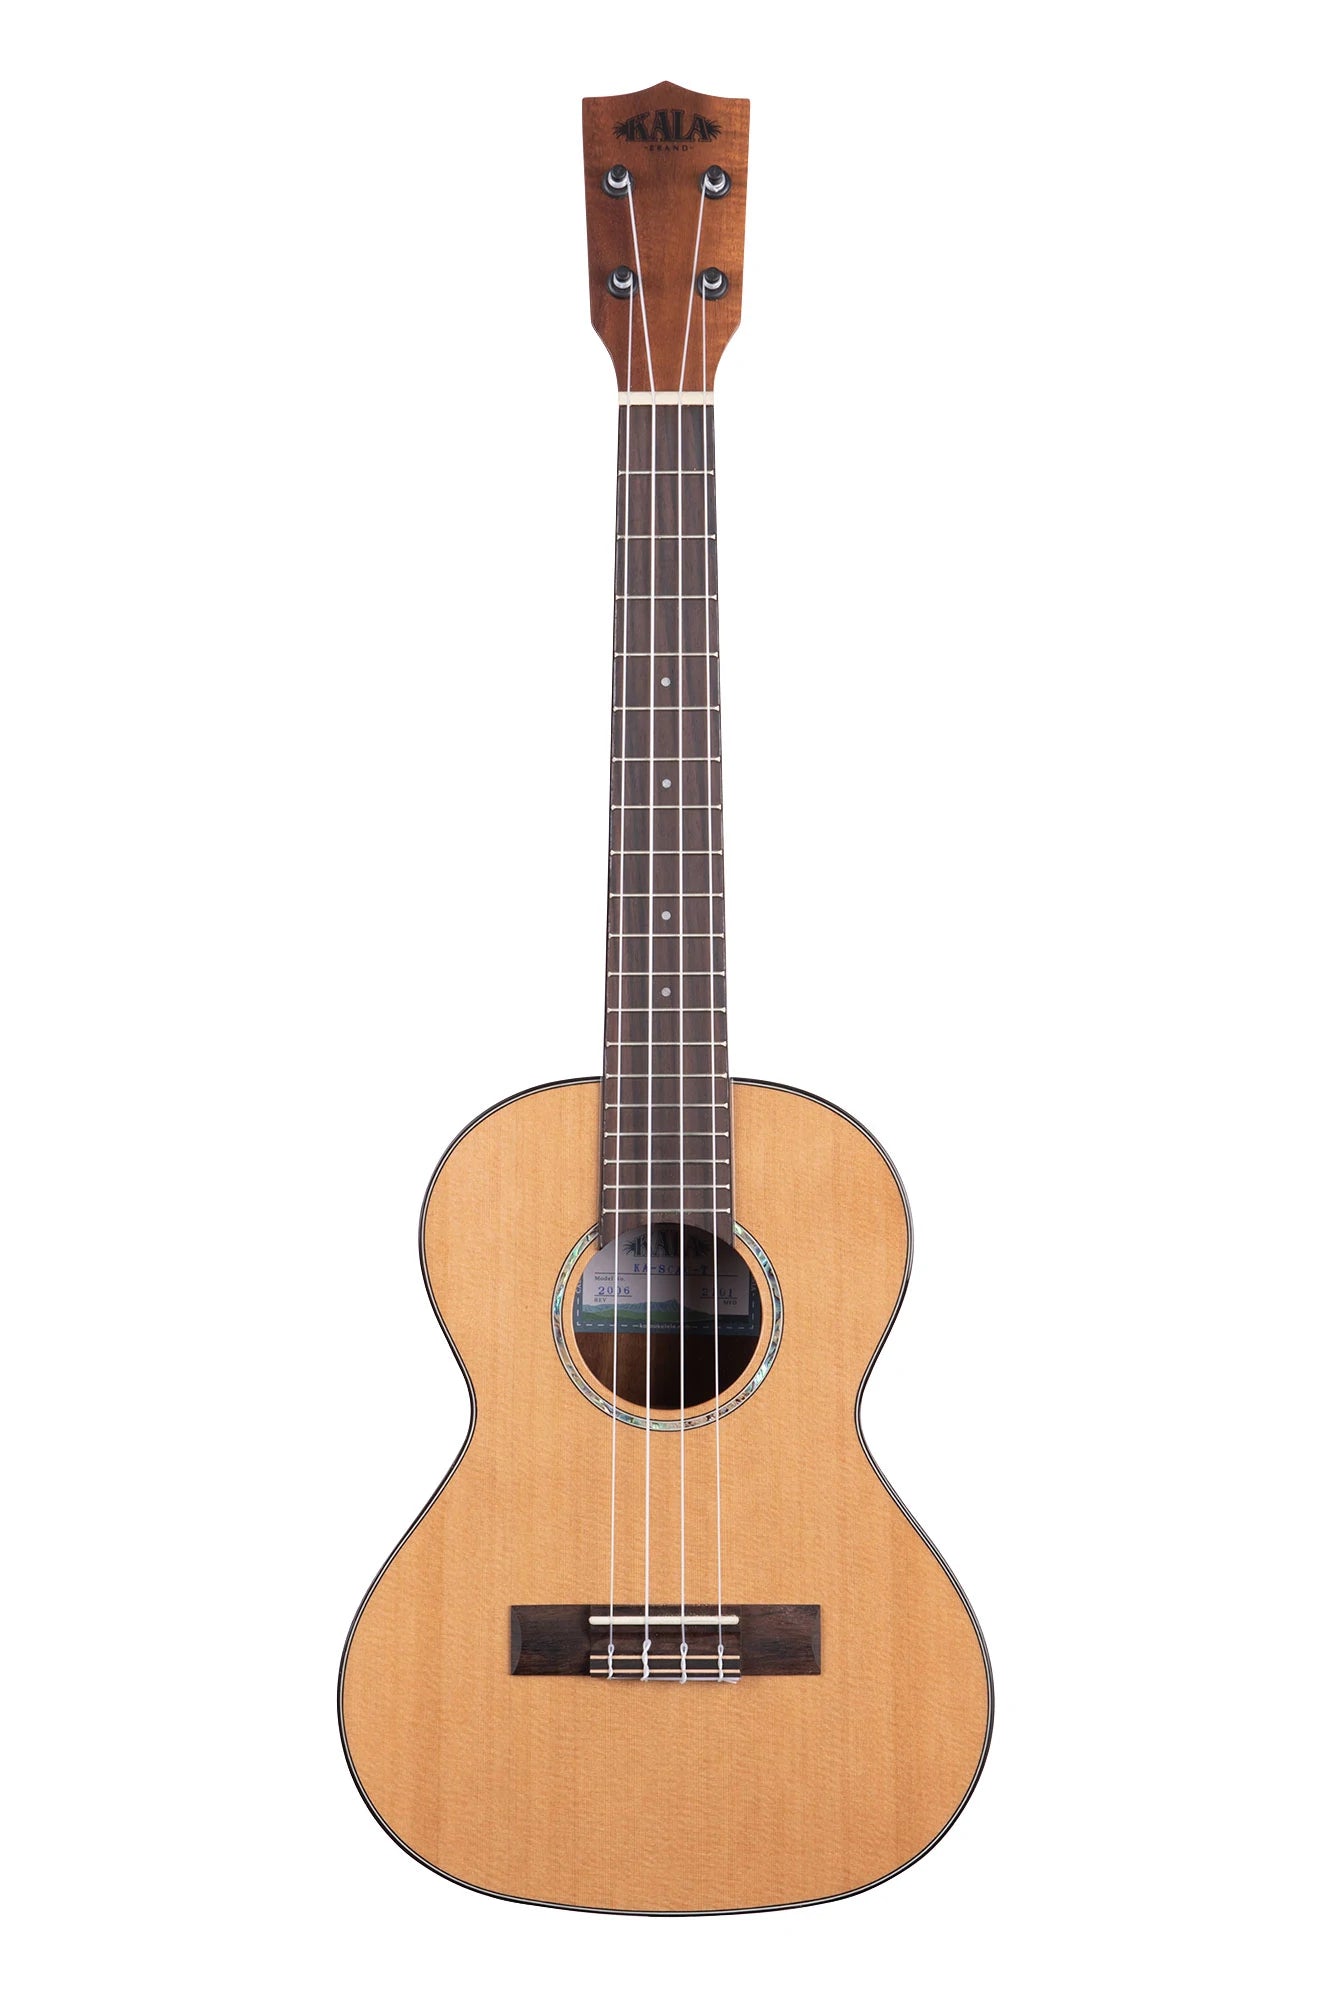 KA-SCAC-T TENOR SOLID CEDAR TOP WITH ACACIA BACK AND SIDES.